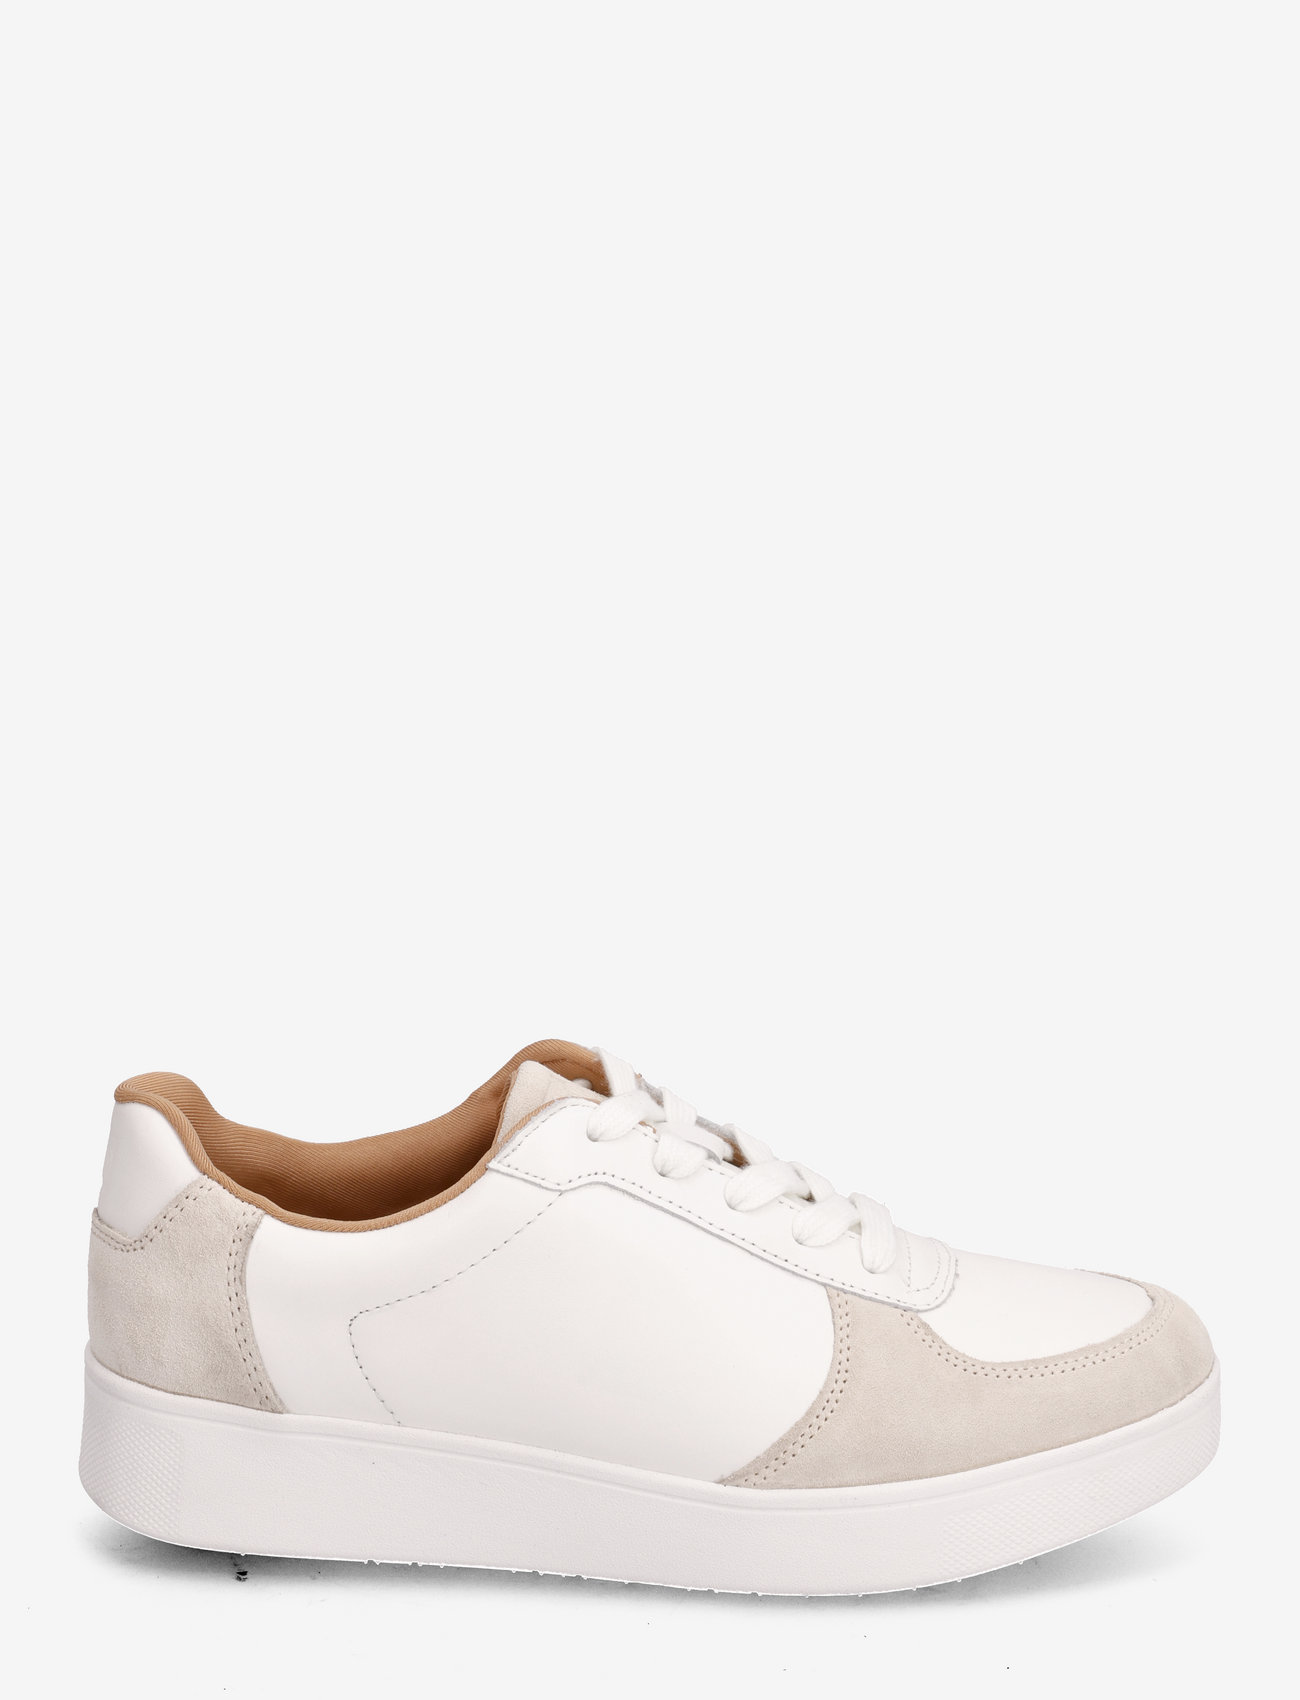 FitFlop - RALLY LEATHER/SUEDE PANEL SNEAKERS - låga sneakers - urban white/paris grey - 1